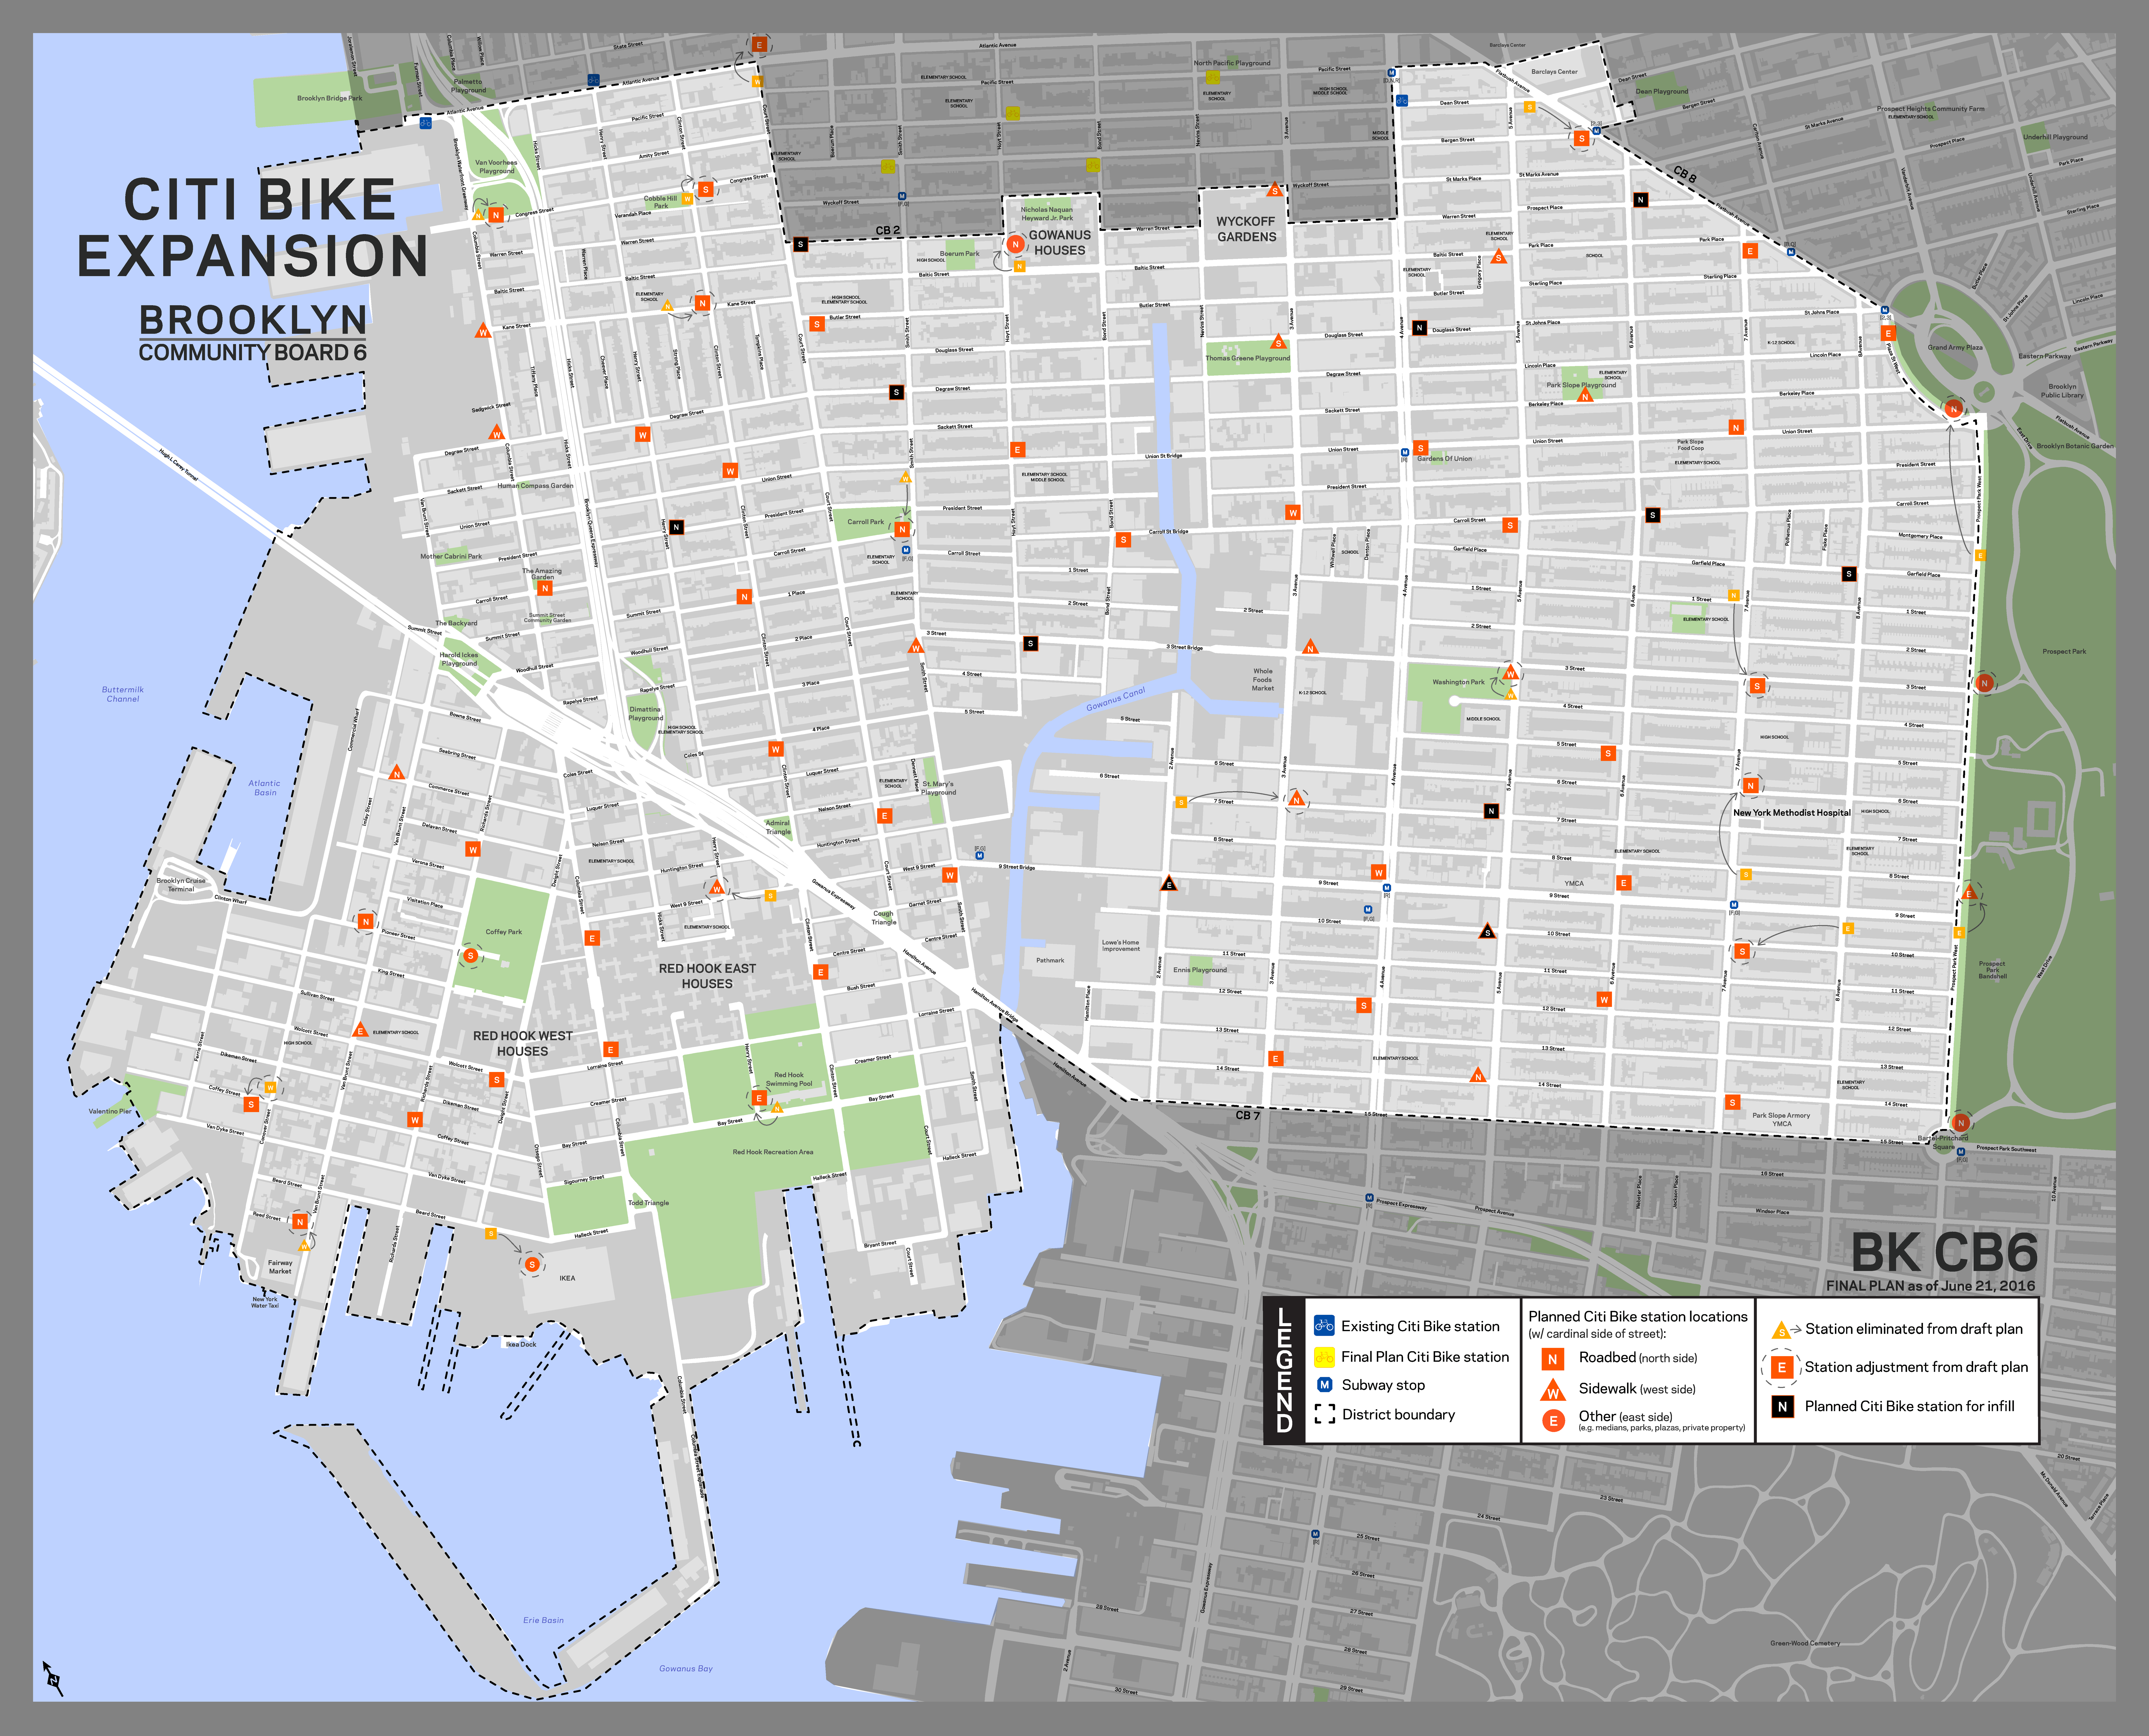 Final Map Released for Bike Share Expansion in Brooklyn CB6 